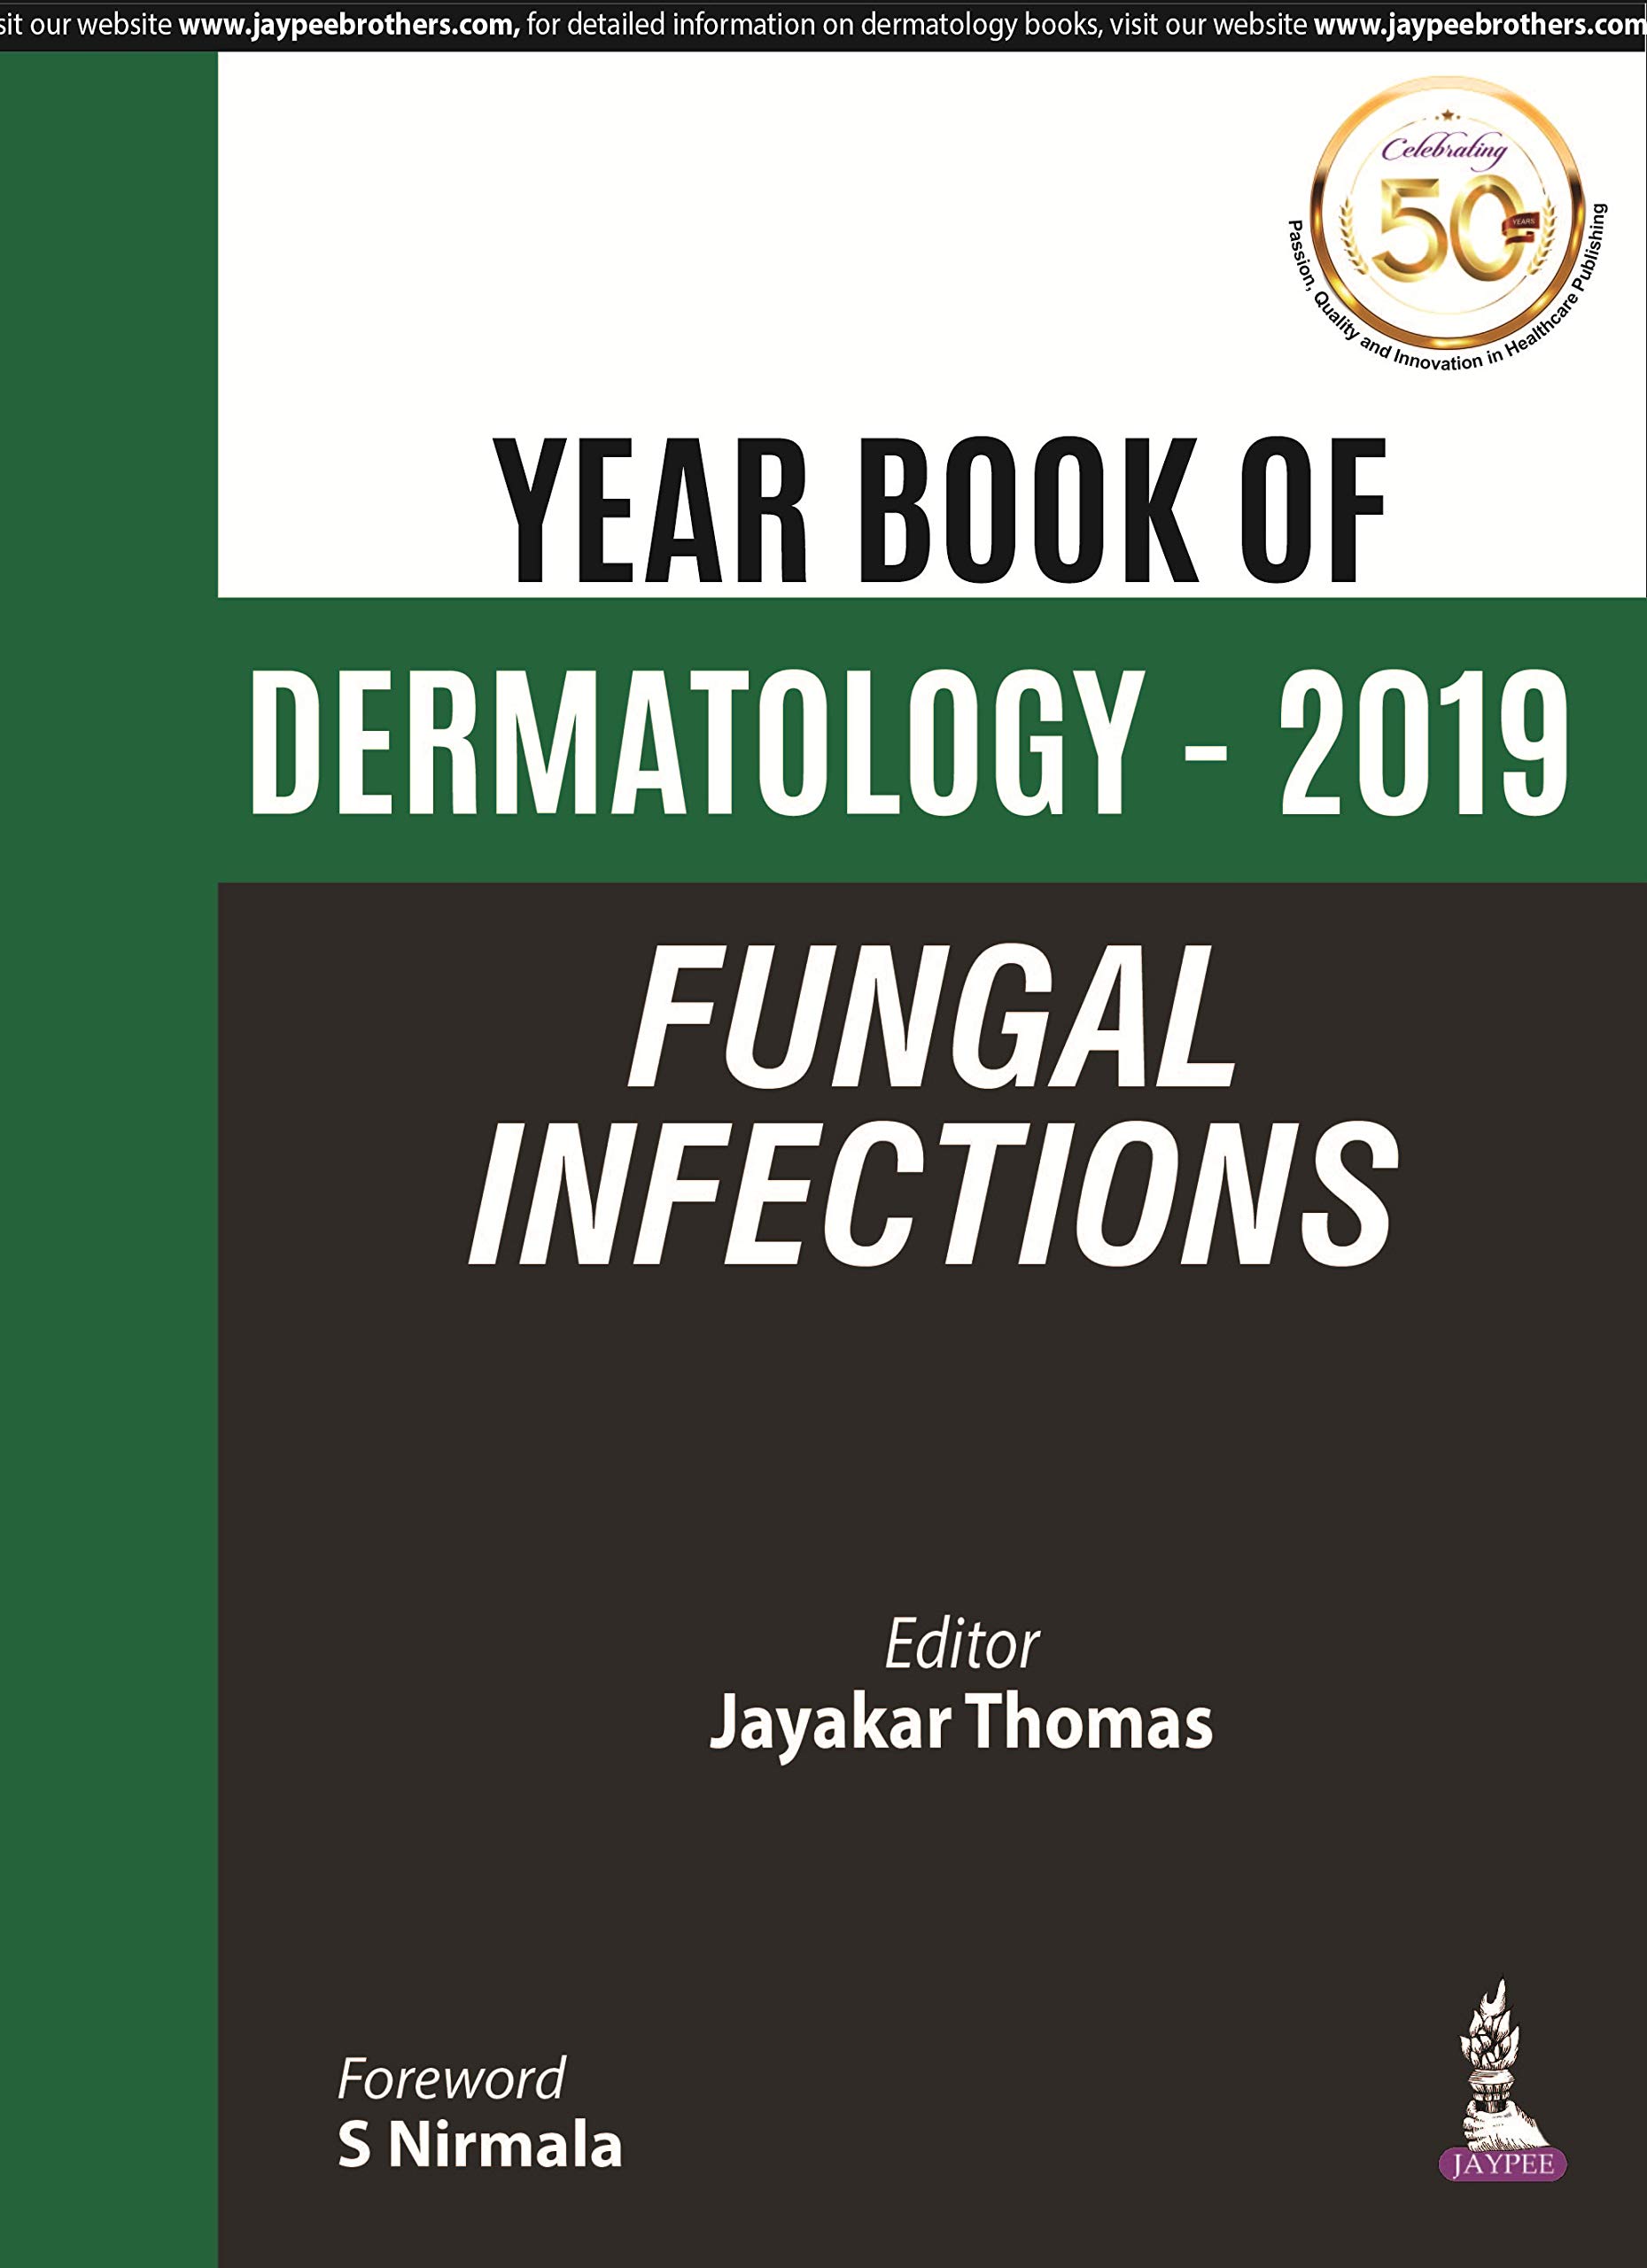 Year Book Of Dermatology - 2019 Fungal Infections